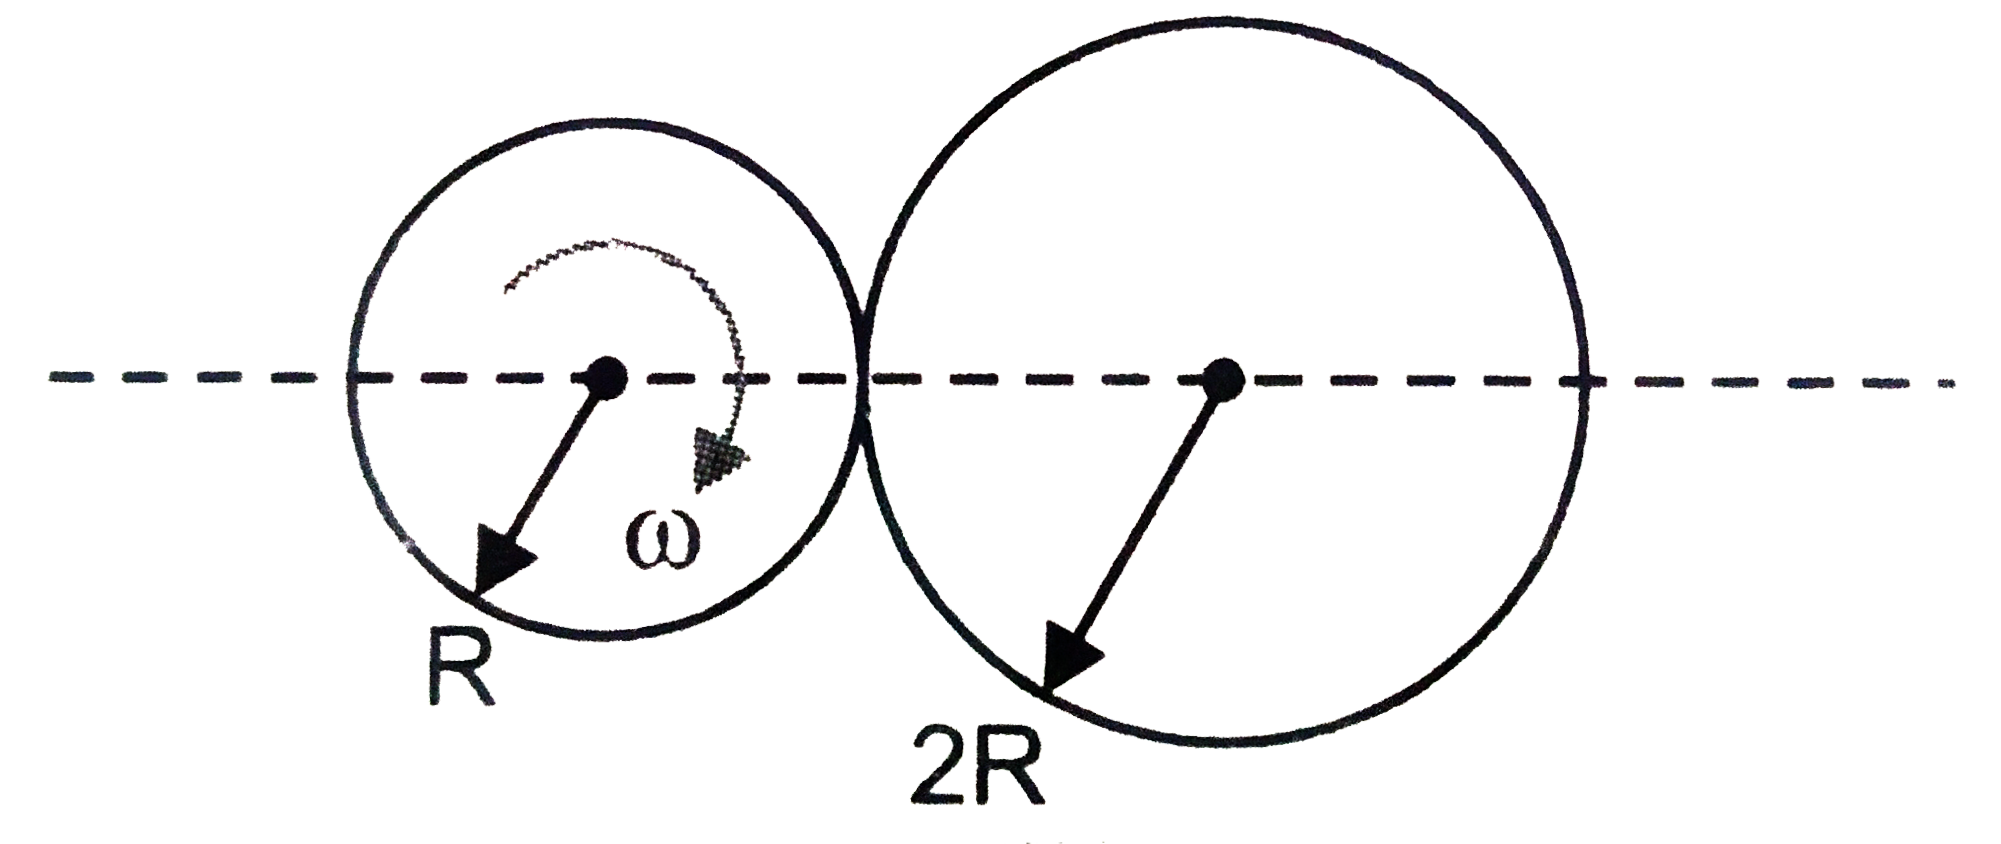 Two discs of radii R and 2R are pressed against eachother. Initially, disc wit radius R is rotating with angular velocity omega and other disc is stationary. Both discs are hinged at their respective centres and are free to rotate about them. Moment of inertiaof smaller disc is I and of bigger disc is 2I about their respective axis of rotation. Find the angular velocity of bigger disc after long time.